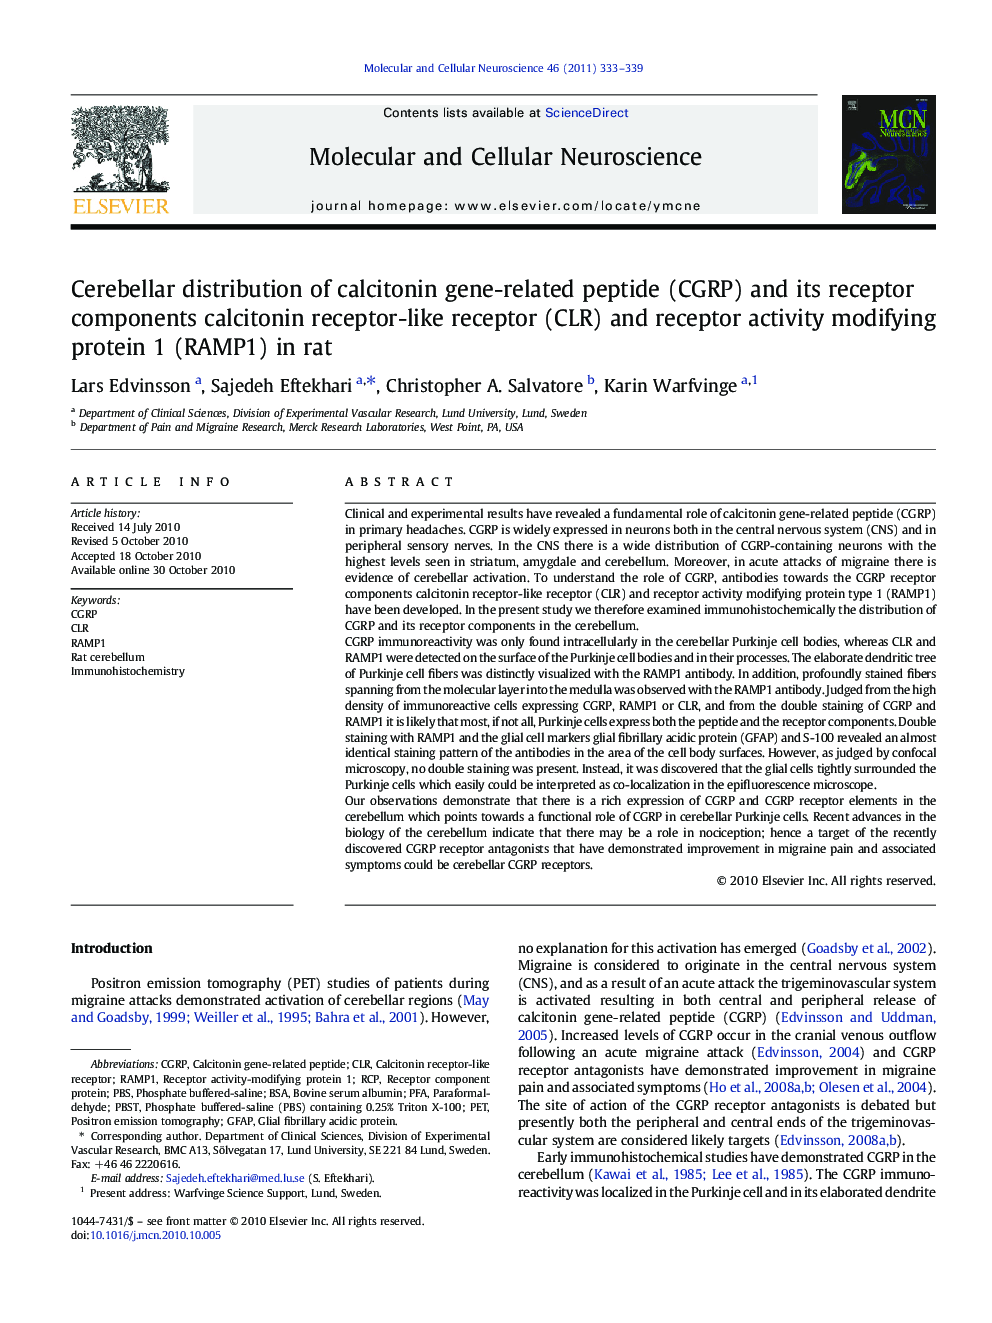 Cerebellar distribution of calcitonin gene-related peptide (CGRP) and its receptor components calcitonin receptor-like receptor (CLR) and receptor activity modifying protein 1 (RAMP1) in rat